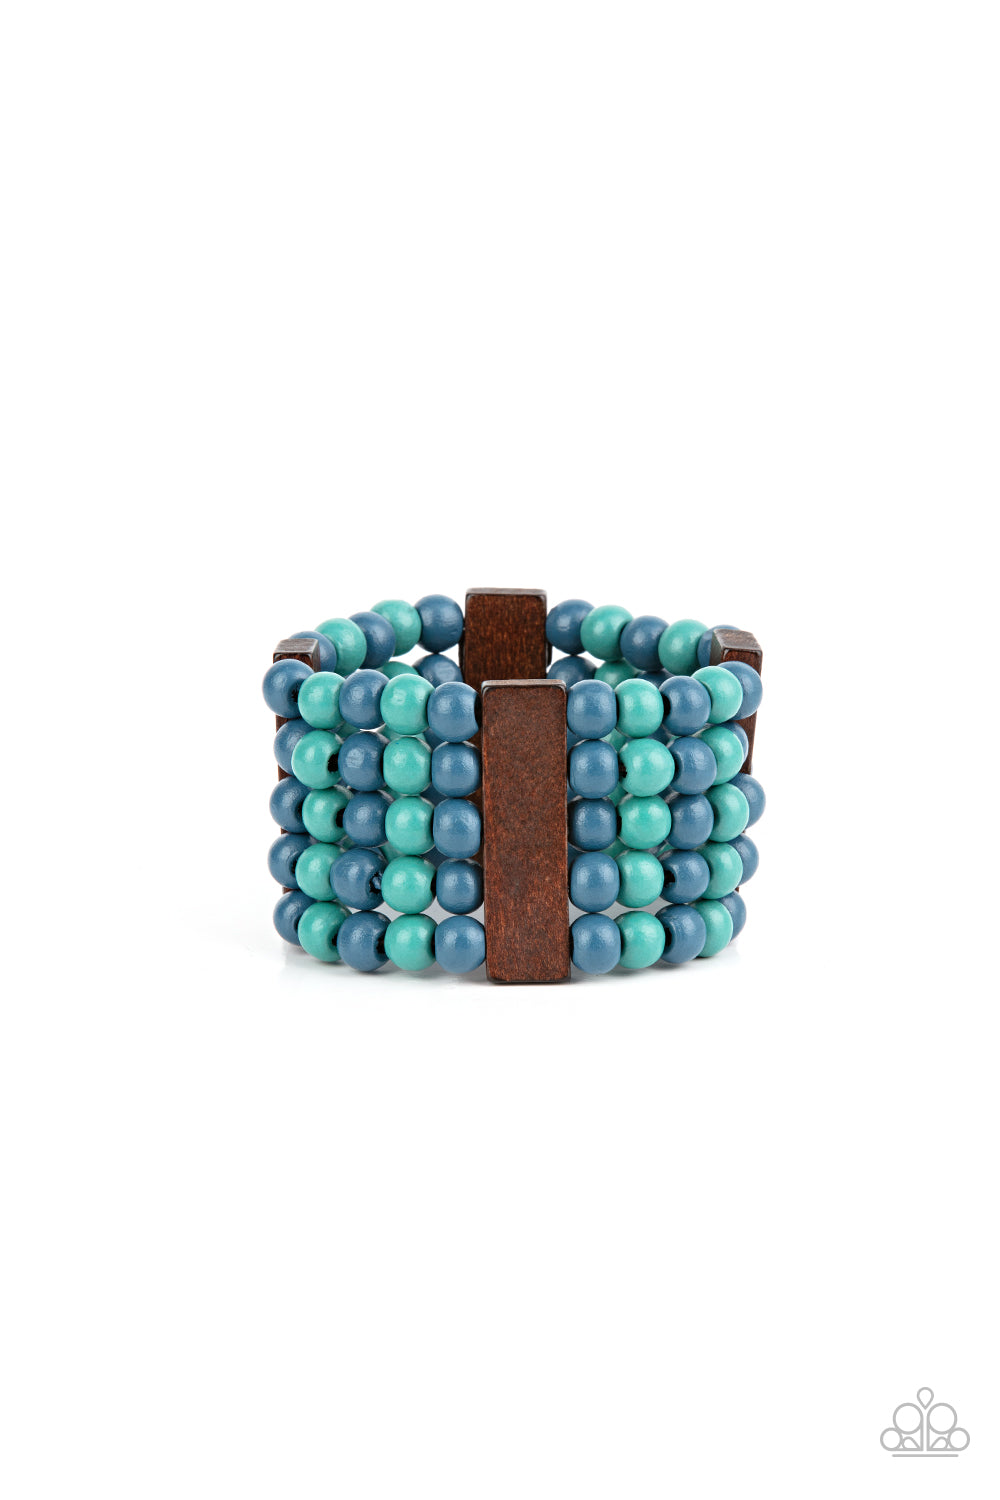 Island Soul Blue Wood Bracelet - Paparazzi Accessories  Colorful layers of blue and turquoise wooden beads are threaded along stretchy bands between dark brown wooden bars creating stacks of subtle bliss around the wrist.  Sold as one individual bracelet.